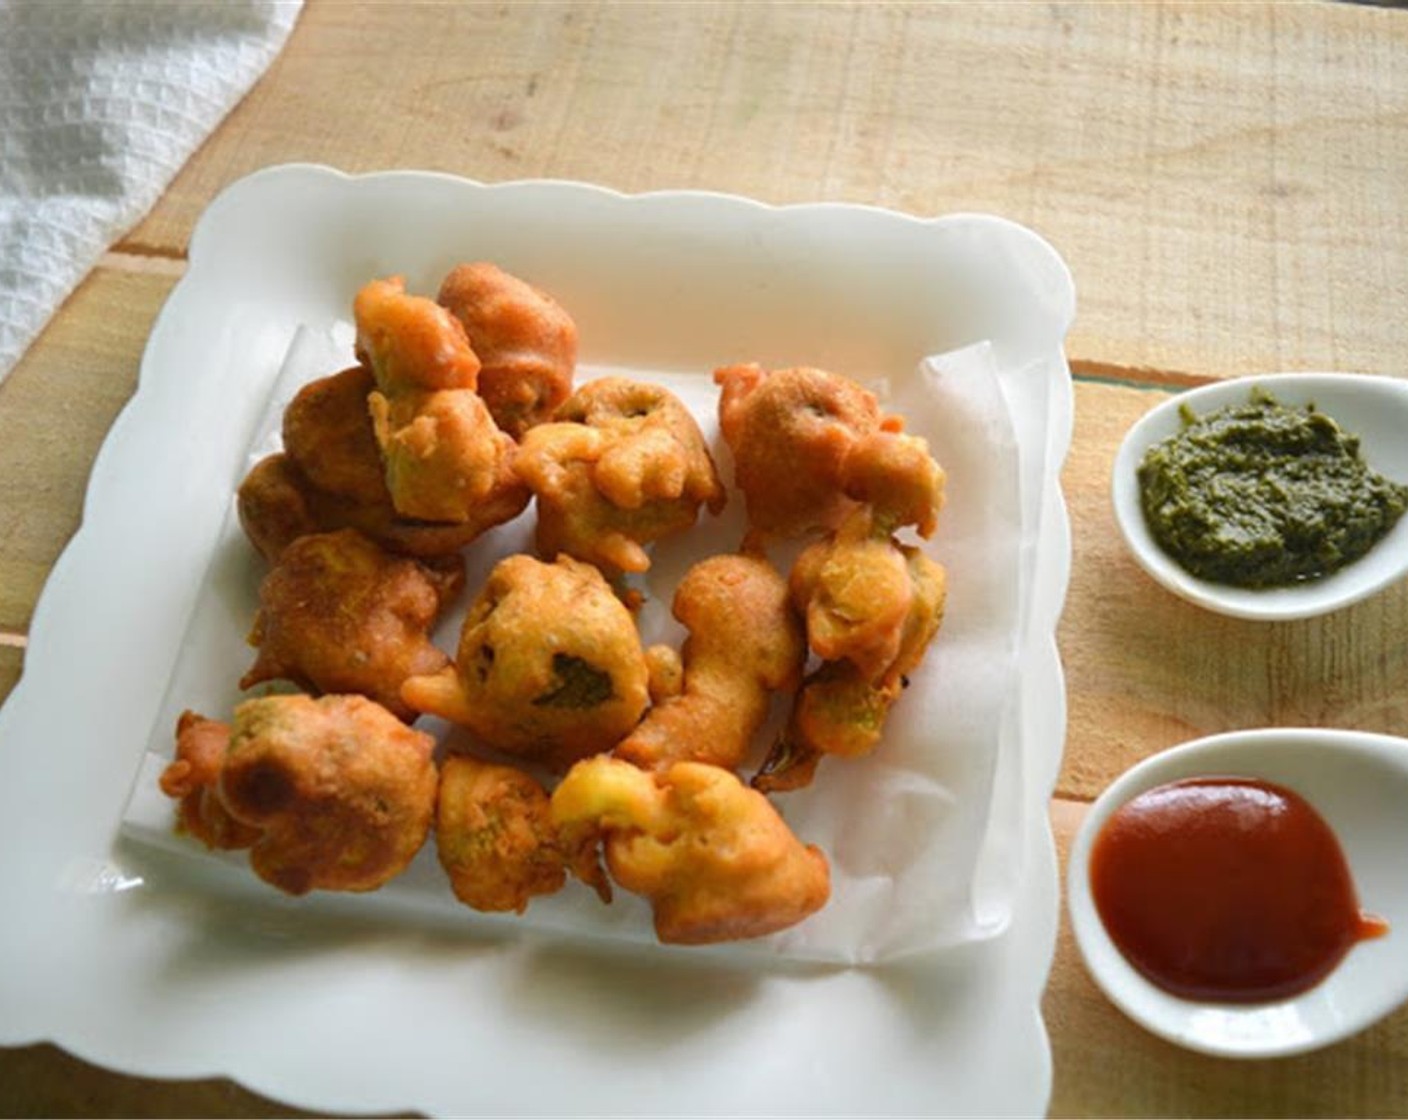 step 5 Serve hot with ketchup and/or mint chutney. Enjoy!